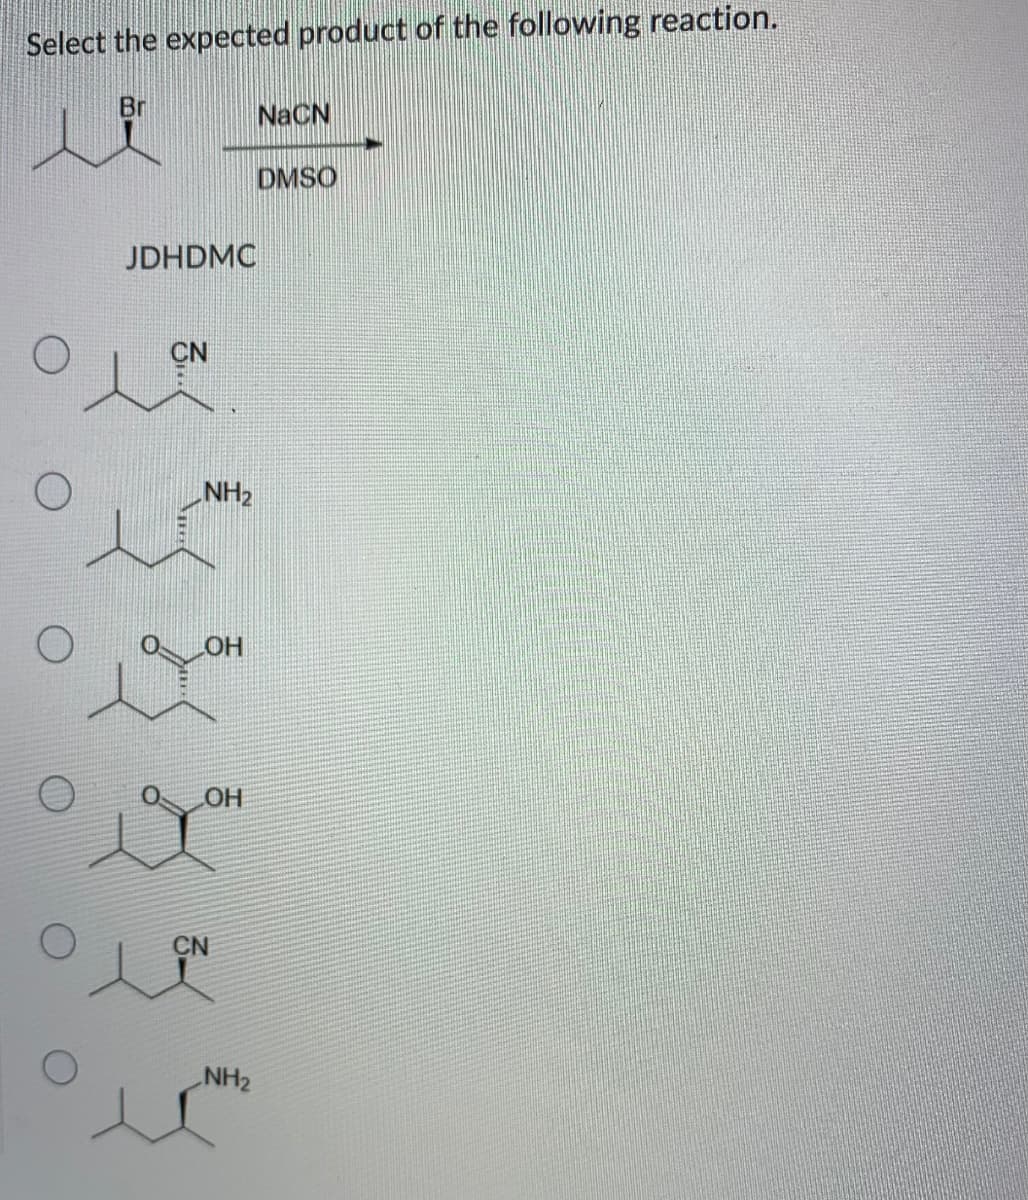 Select the expected product of the following reaction.
Br
NaCN
DMSO
JDHDMC
CN
NH2
O
OH
CN
NH2
